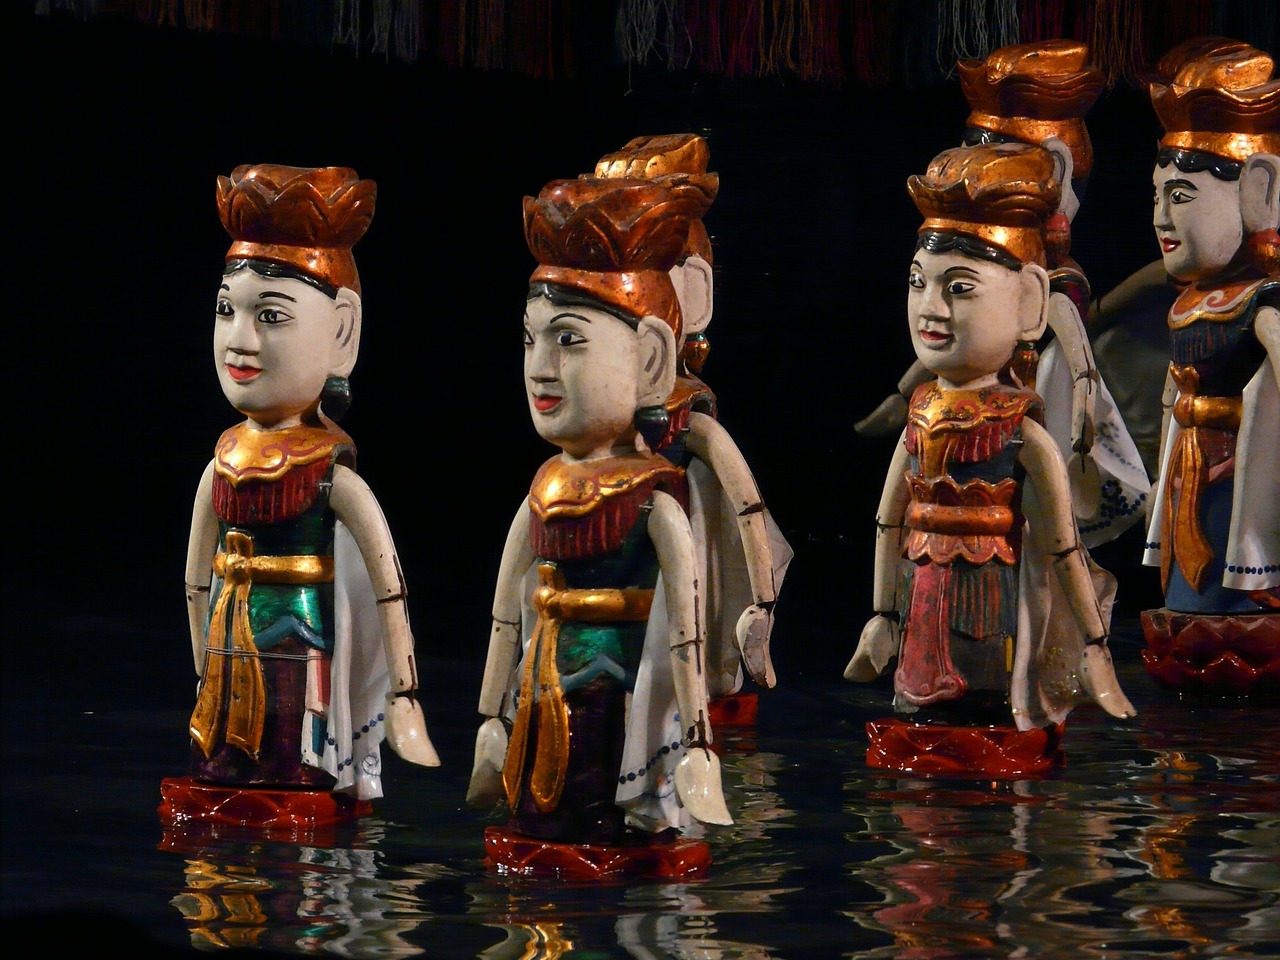 water-puppets-4417_1280